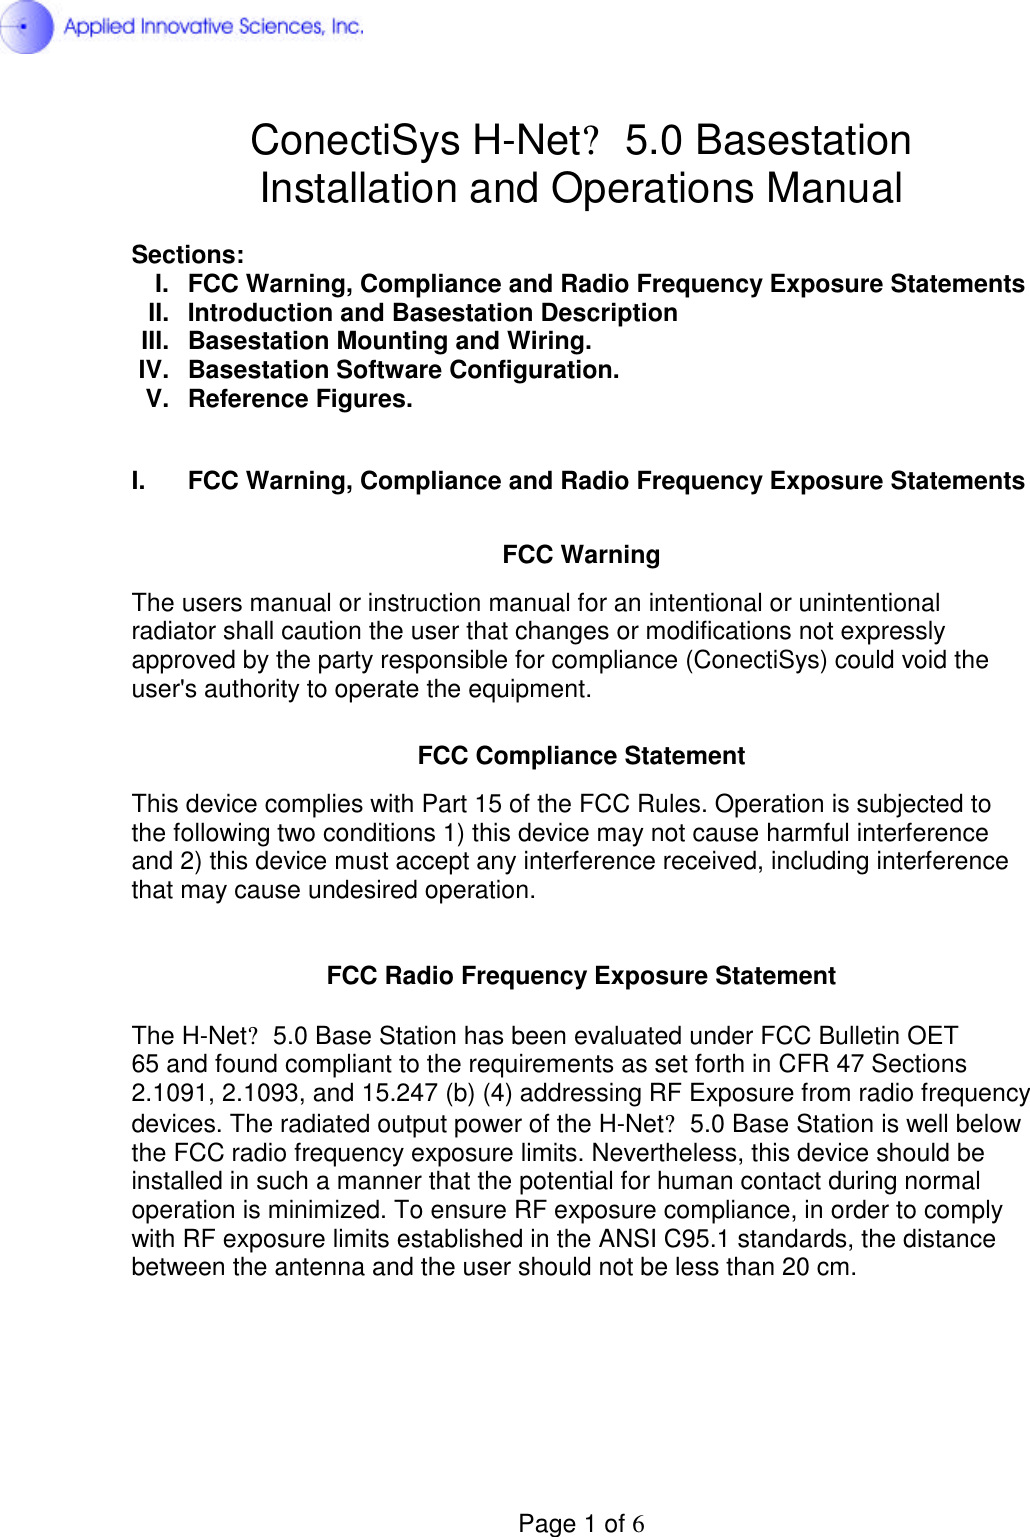  Page 1 of 6 ConectiSys H-Net? 5.0 Basestation Installation and Operations Manual  Sections: I.  FCC Warning, Compliance and Radio Frequency Exposure Statements II.  Introduction and Basestation Description III.  Basestation Mounting and Wiring. IV.  Basestation Software Configuration. V.  Reference Figures.  I.  FCC Warning, Compliance and Radio Frequency Exposure Statements   FCC Warning  The users manual or instruction manual for an intentional or unintentional radiator shall caution the user that changes or modifications not expressly approved by the party responsible for compliance (ConectiSys) could void the user&apos;s authority to operate the equipment.   FCC Compliance Statement  This device complies with Part 15 of the FCC Rules. Operation is subjected to the following two conditions 1) this device may not cause harmful interference and 2) this device must accept any interference received, including interference that may cause undesired operation.   FCC Radio Frequency Exposure Statement  The H-Net? 5.0 Base Station has been evaluated under FCC Bulletin OET  65 and found compliant to the requirements as set forth in CFR 47 Sections  2.1091, 2.1093, and 15.247 (b) (4) addressing RF Exposure from radio frequency devices. The radiated output power of the H-Net? 5.0 Base Station is well below the FCC radio frequency exposure limits. Nevertheless, this device should be installed in such a manner that the potential for human contact during normal operation is minimized. To ensure RF exposure compliance, in order to comply with RF exposure limits established in the ANSI C95.1 standards, the distance between the antenna and the user should not be less than 20 cm.       